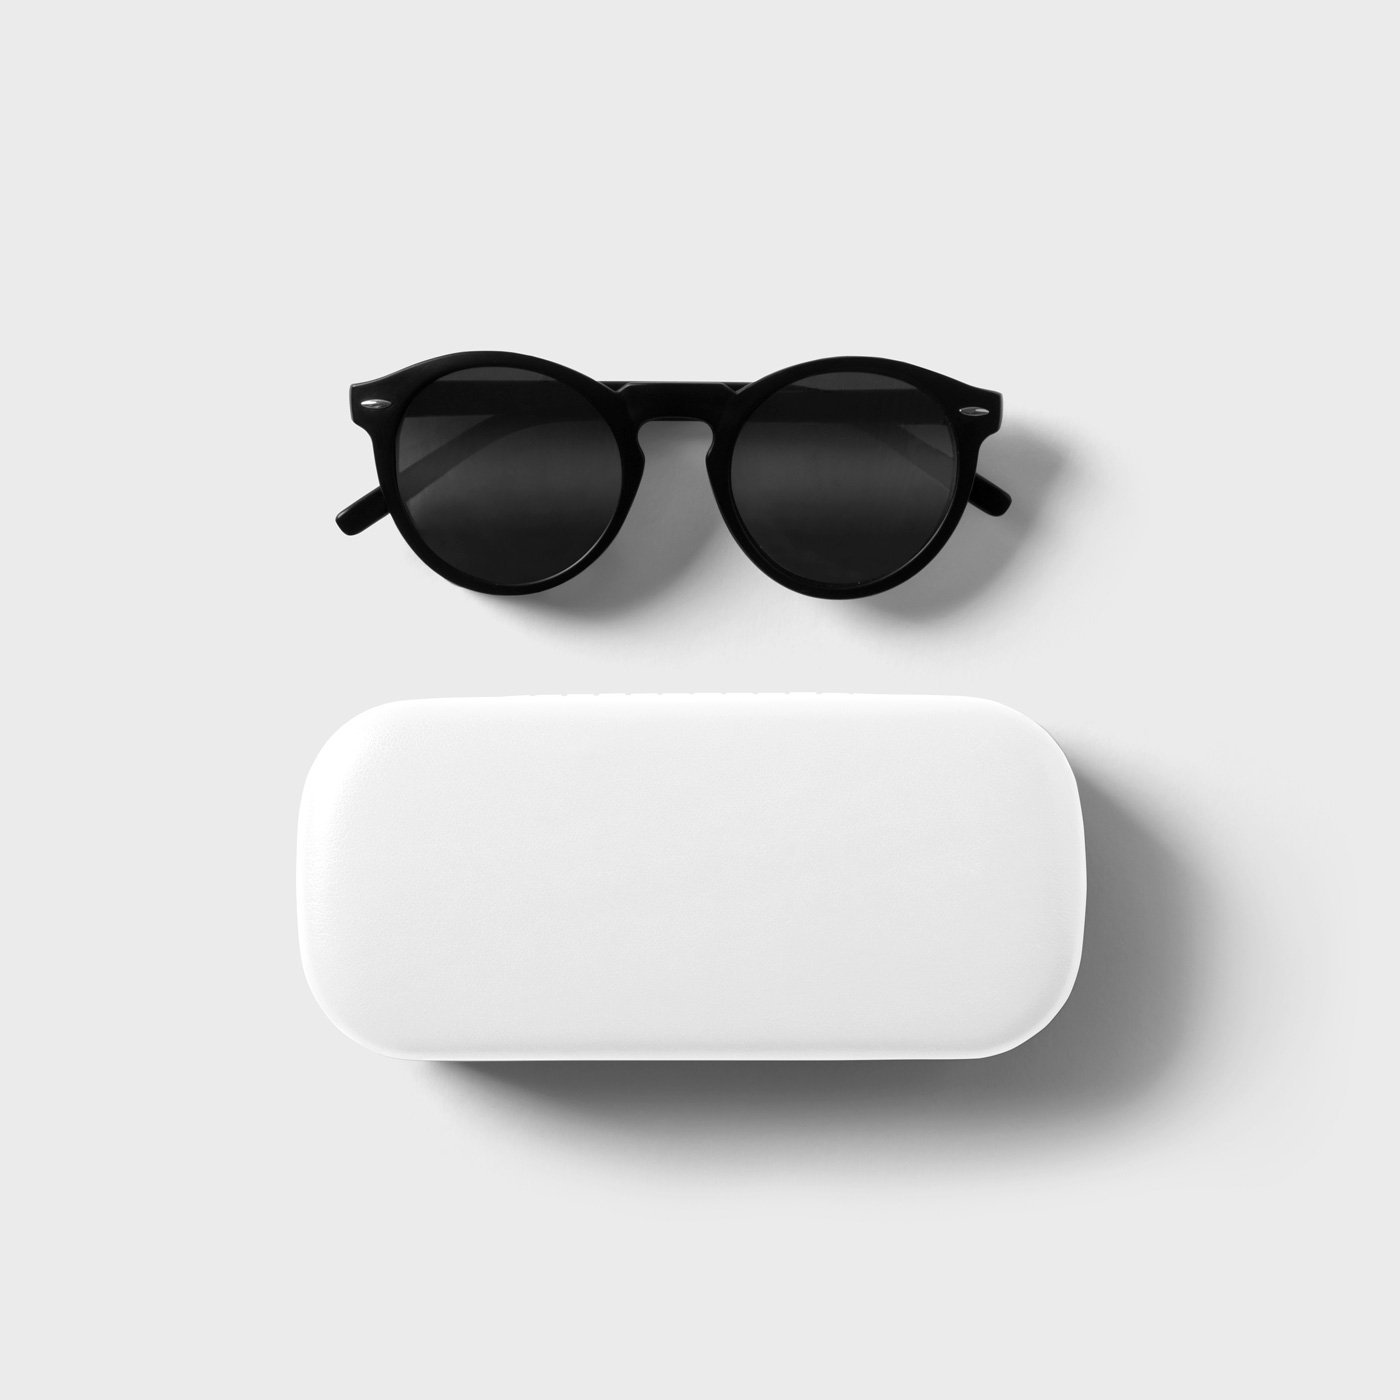 Top Sight of Glasses Case Mockup with Sunglasses FREE PSD